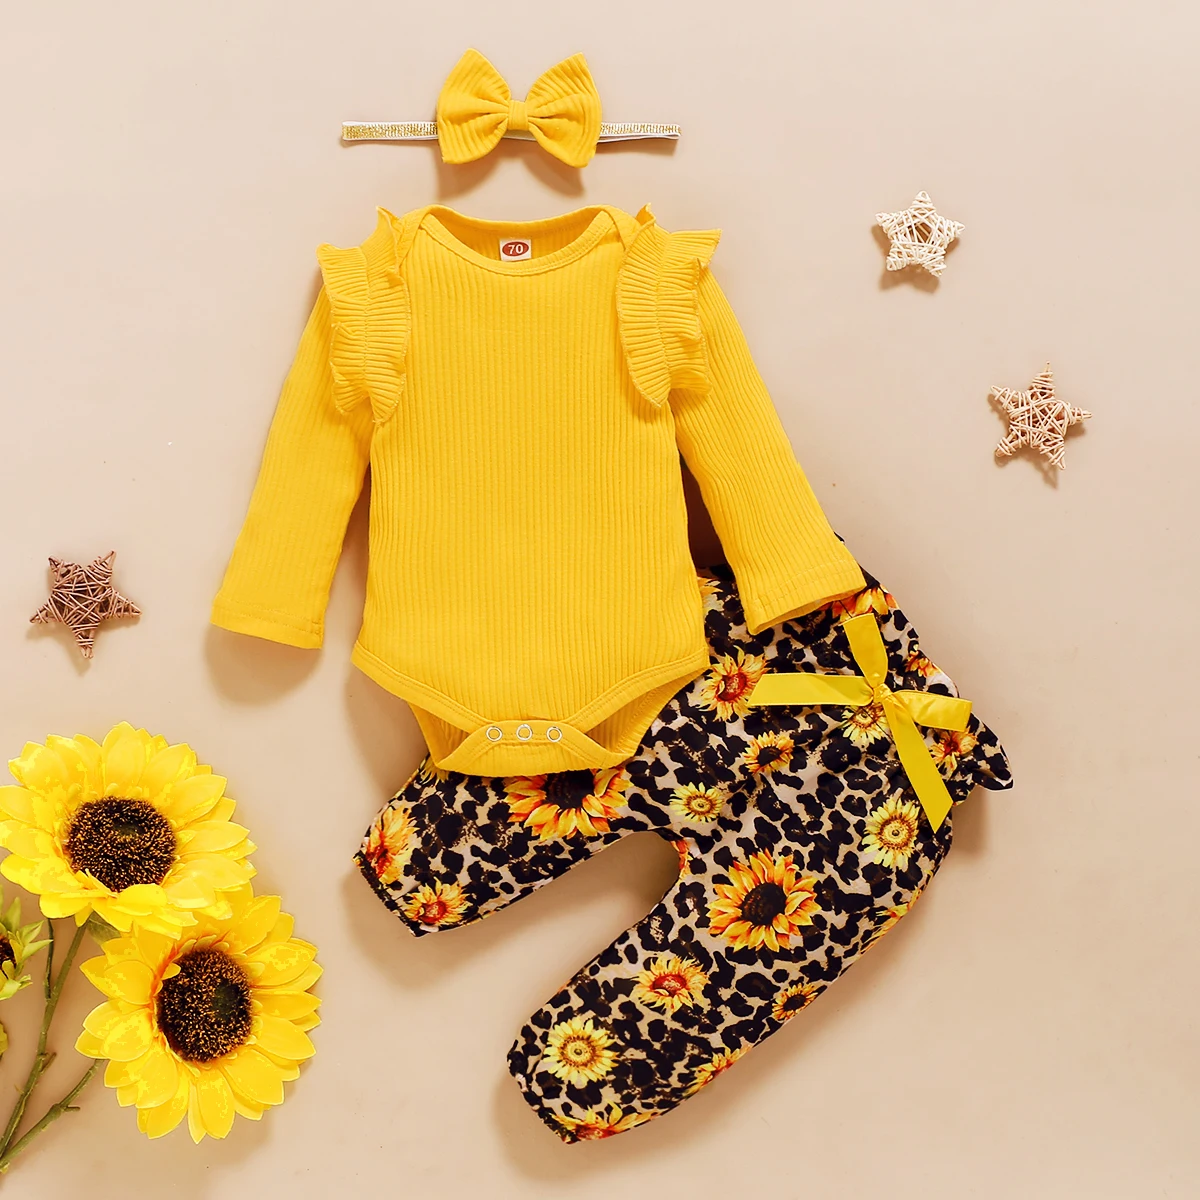 Floral Baby Girl Clothes Set 3 6 months Newborn Baby Girl Clothes Summer Toddler Infant Girl Clothes Kids Clothes Girls Outfit vintage Baby Clothing Set